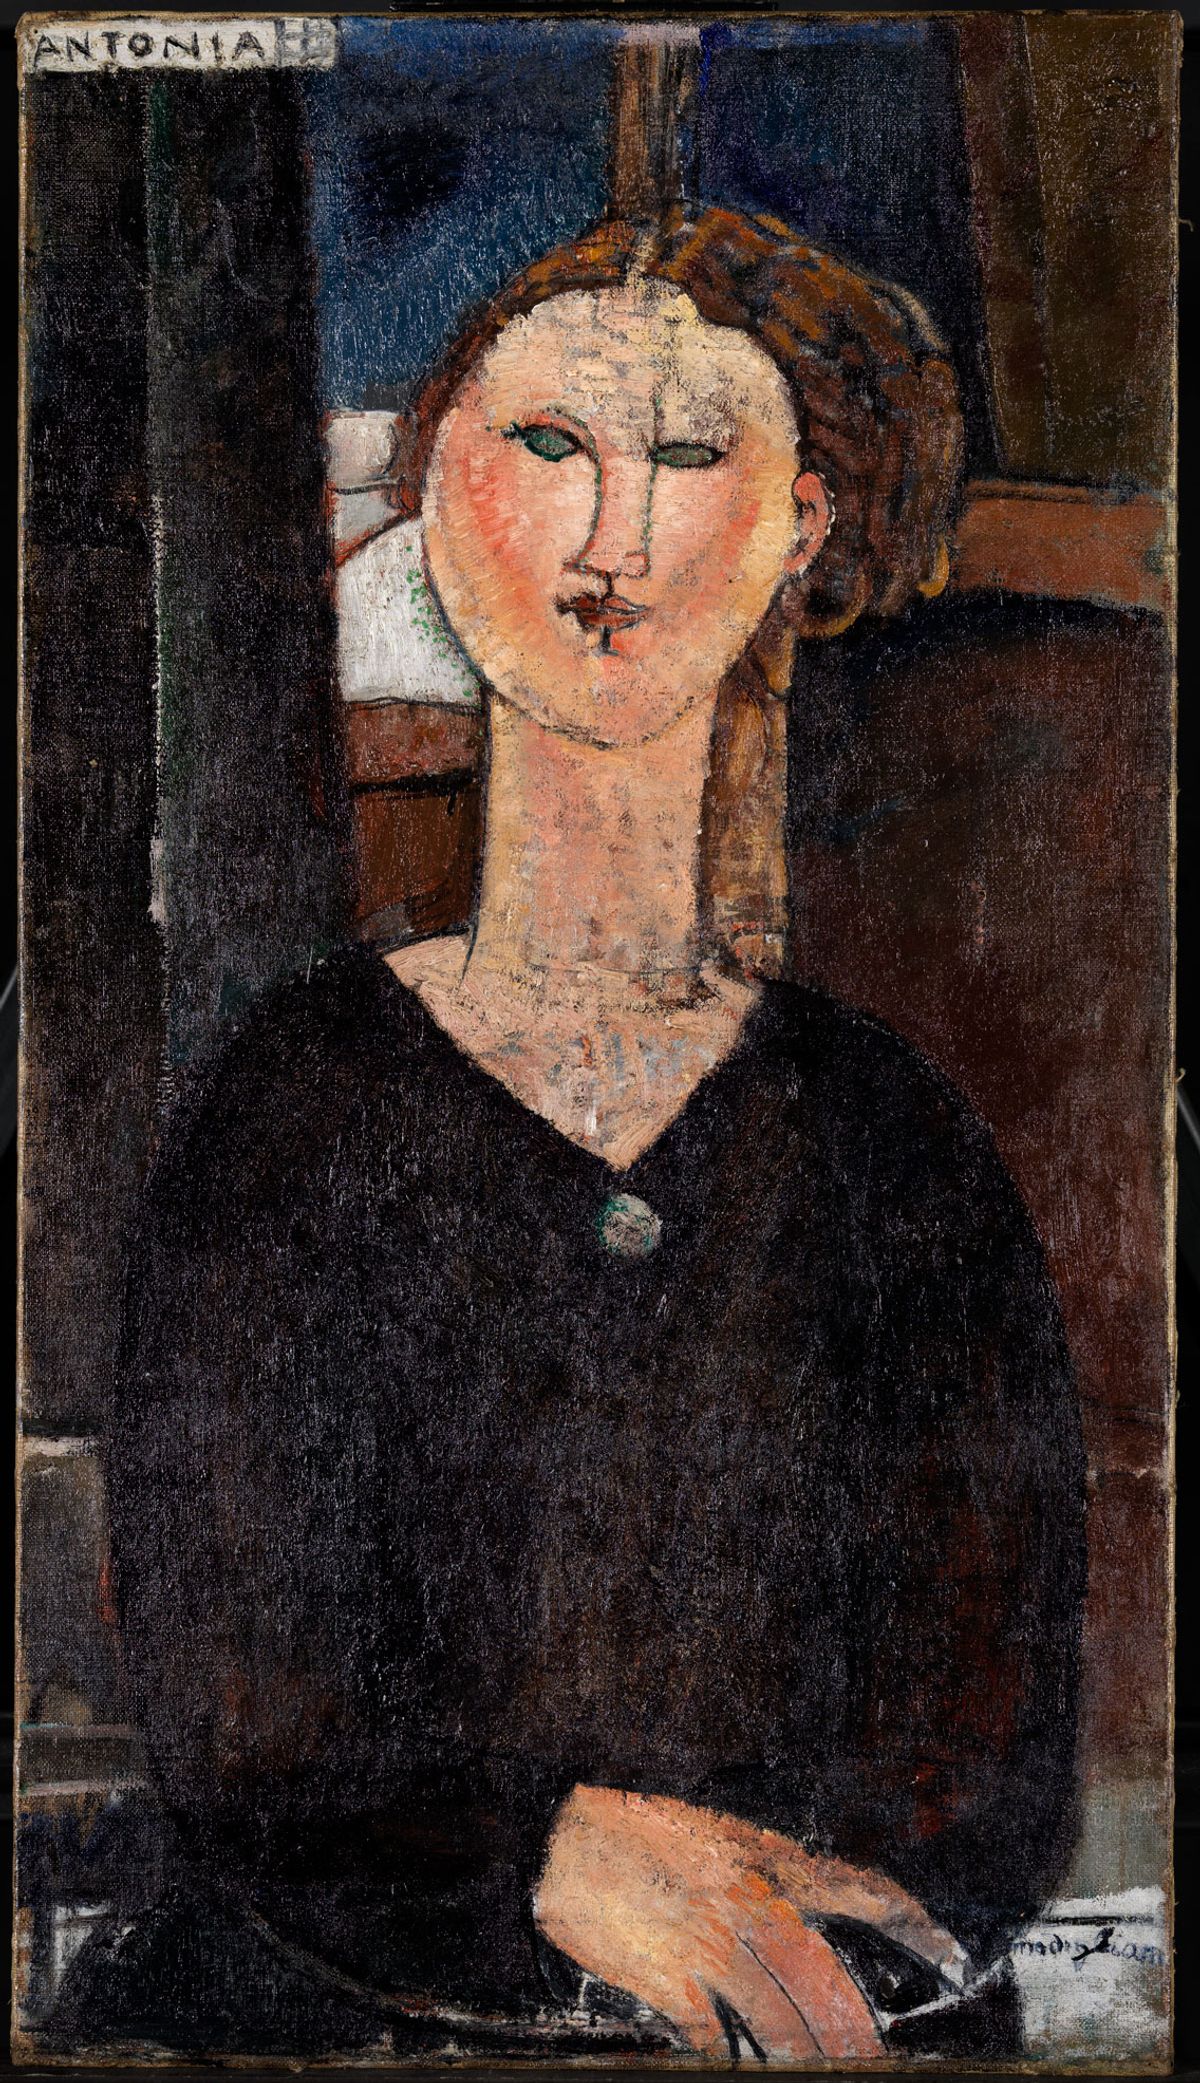 France's national museums laboratory has conducted a forensic study of every Modigliani painting and sculpture in the country's public collections. Antonia (around 1915) has emerged as the most complex of all © Centre de Recherche et de Restauration des Musées de France/Gérald Parisse